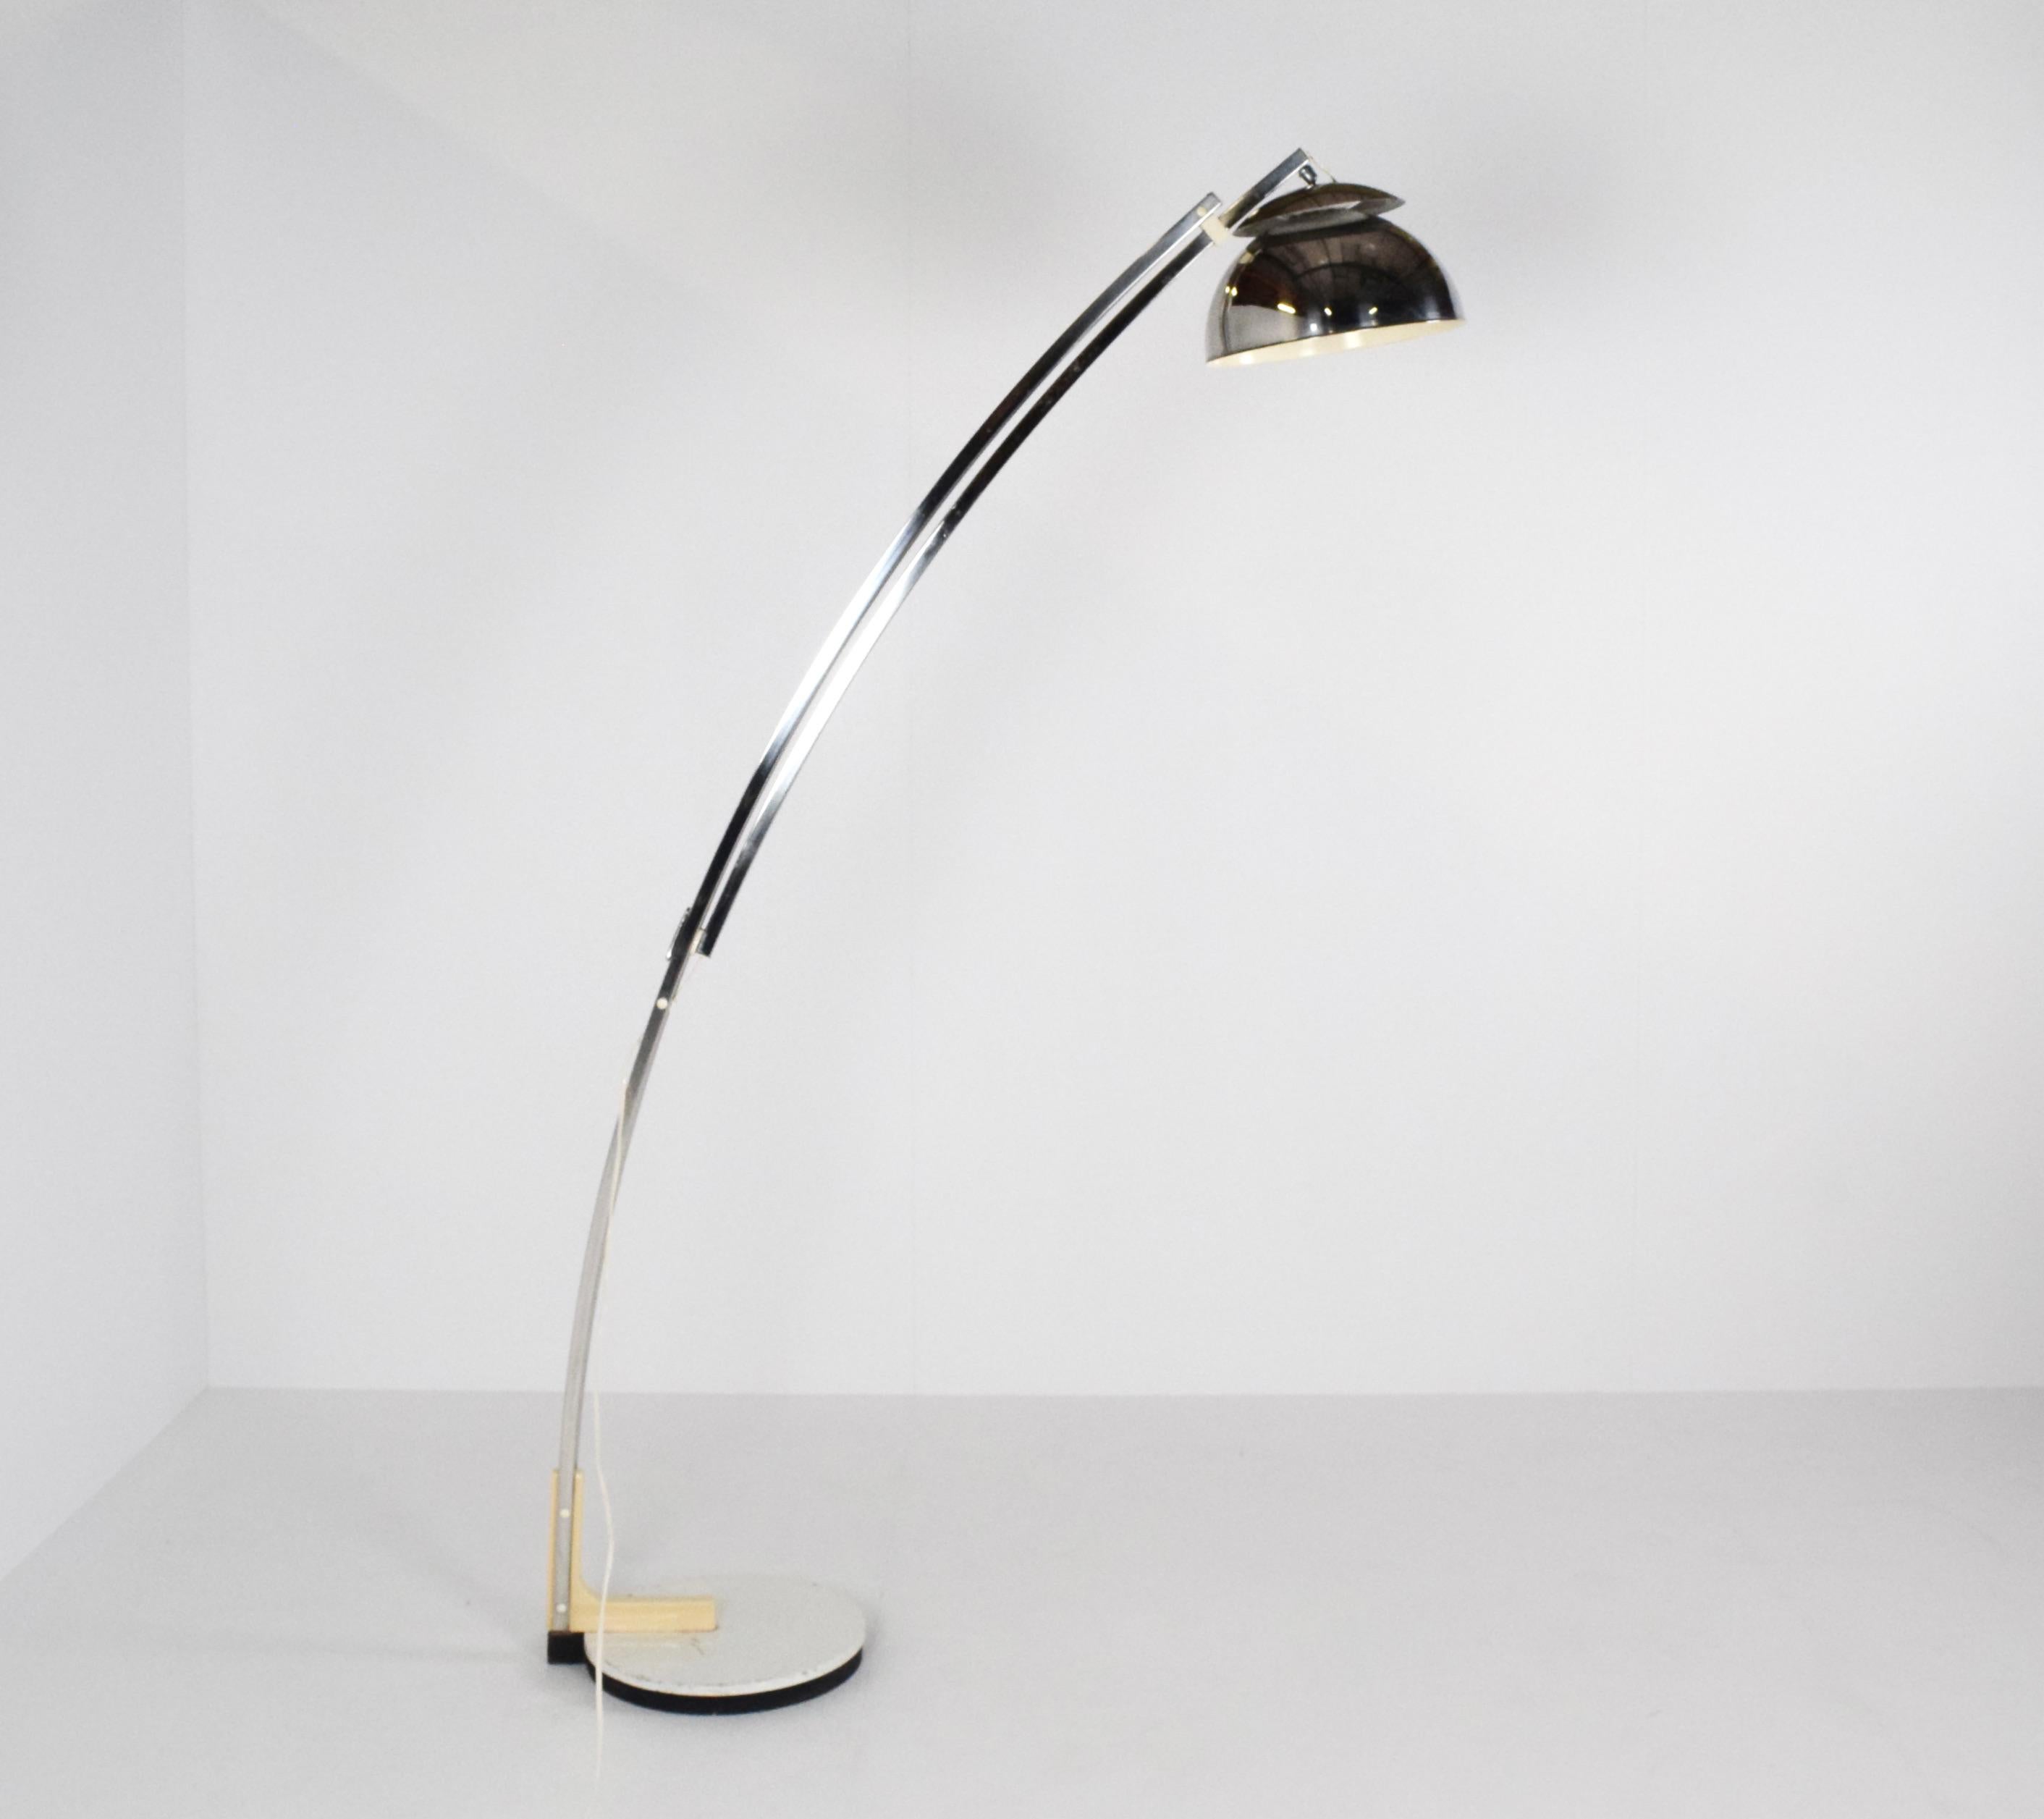 Original Goffredo Reggiani adjustable chrome arc floor lamp from Italy late 1960s or early 1970s. It is produced by the 'Reggiani Lighting Company. This iconic lamp has the original patina and wiring and is in working condition. It is adjustable to